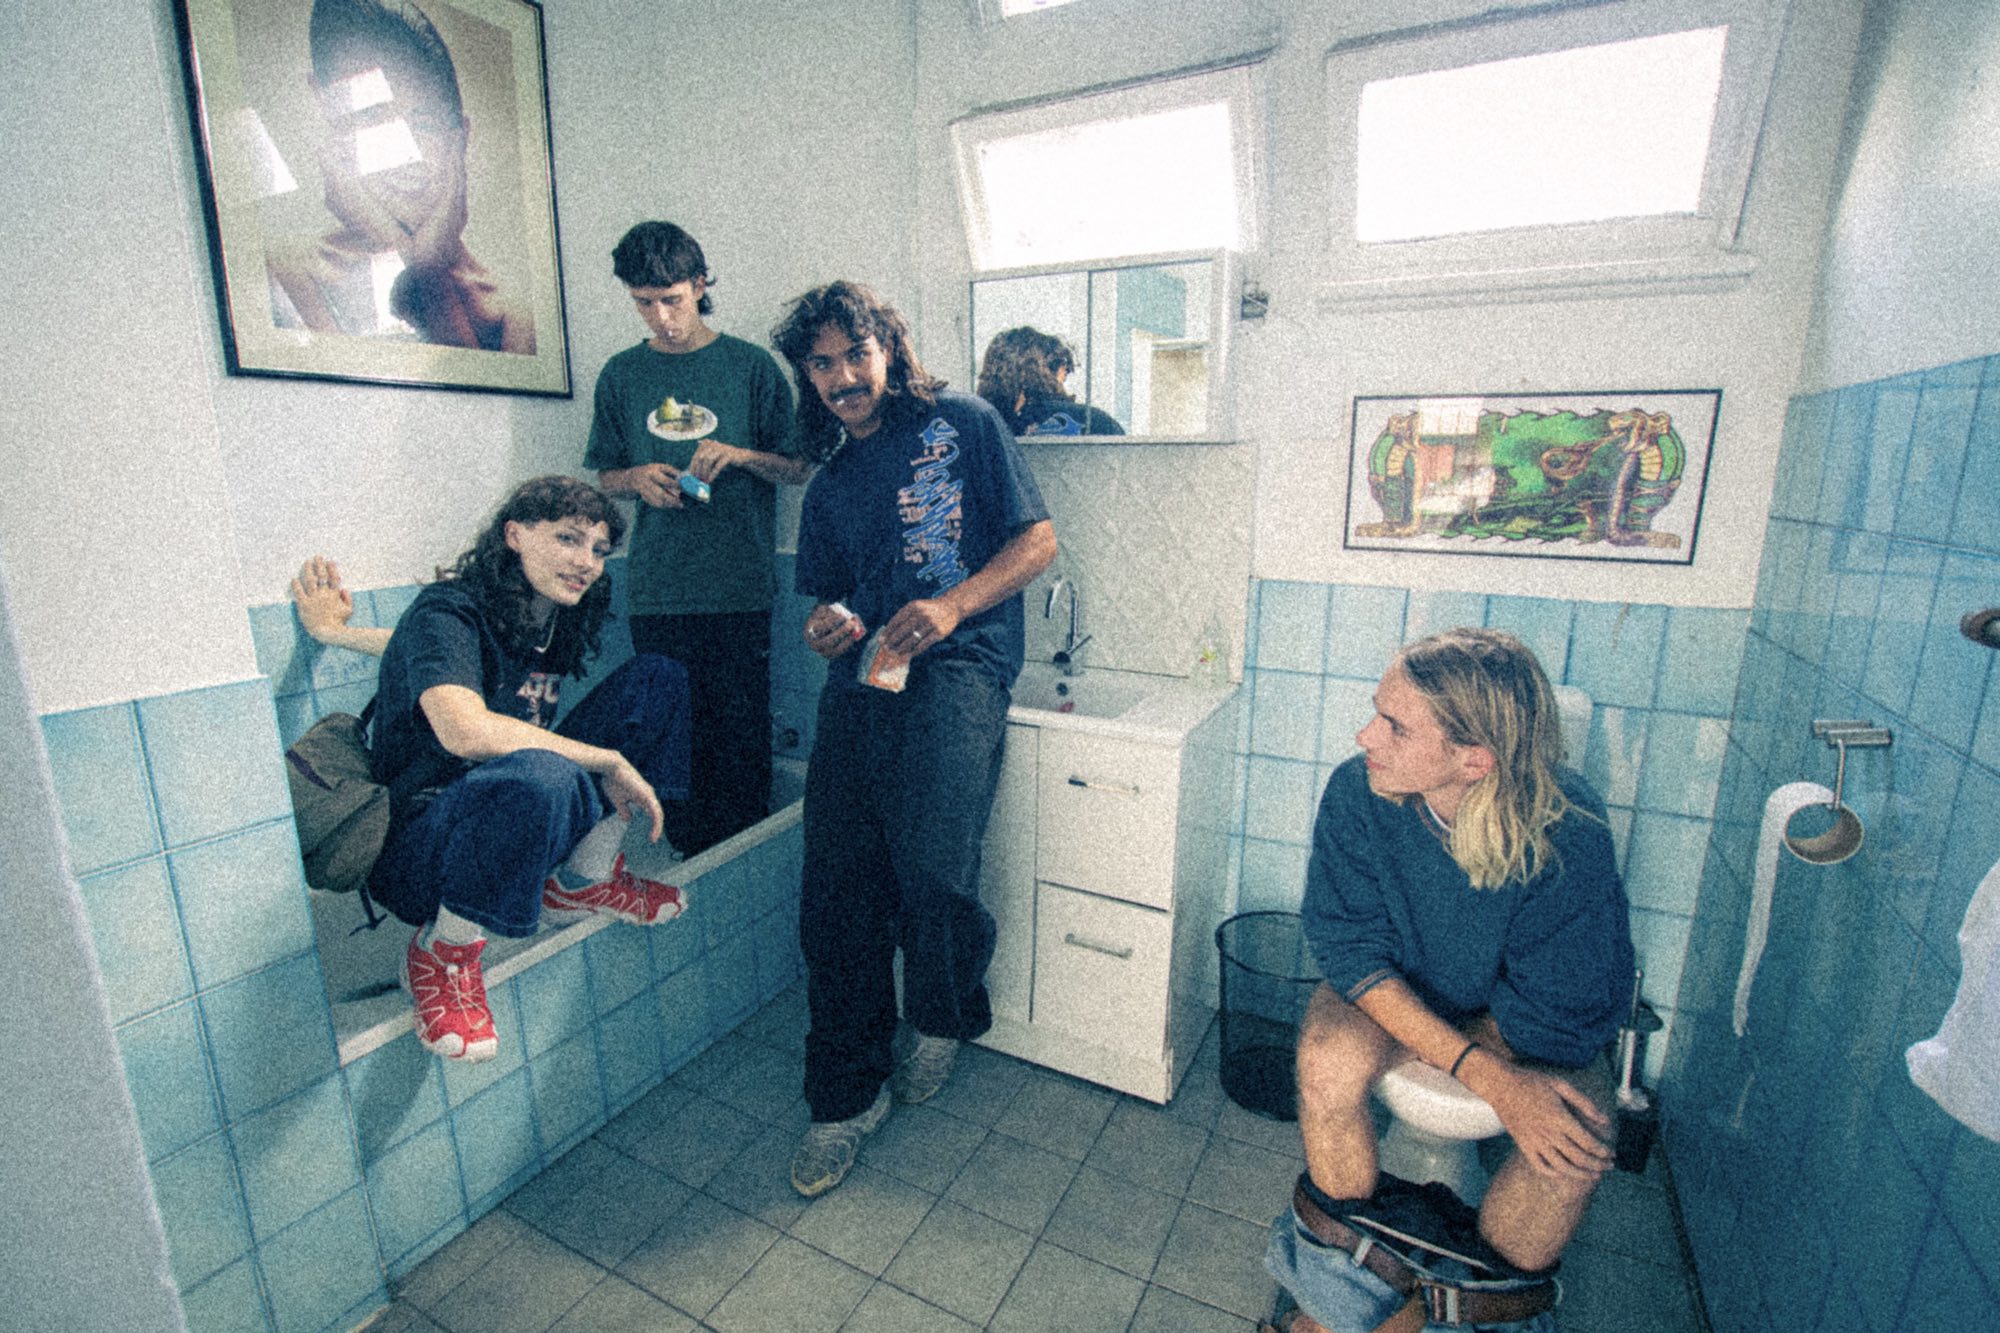 Stimpies in a bathroom. From left to right: Bec, Ned, Xavier, Ethan